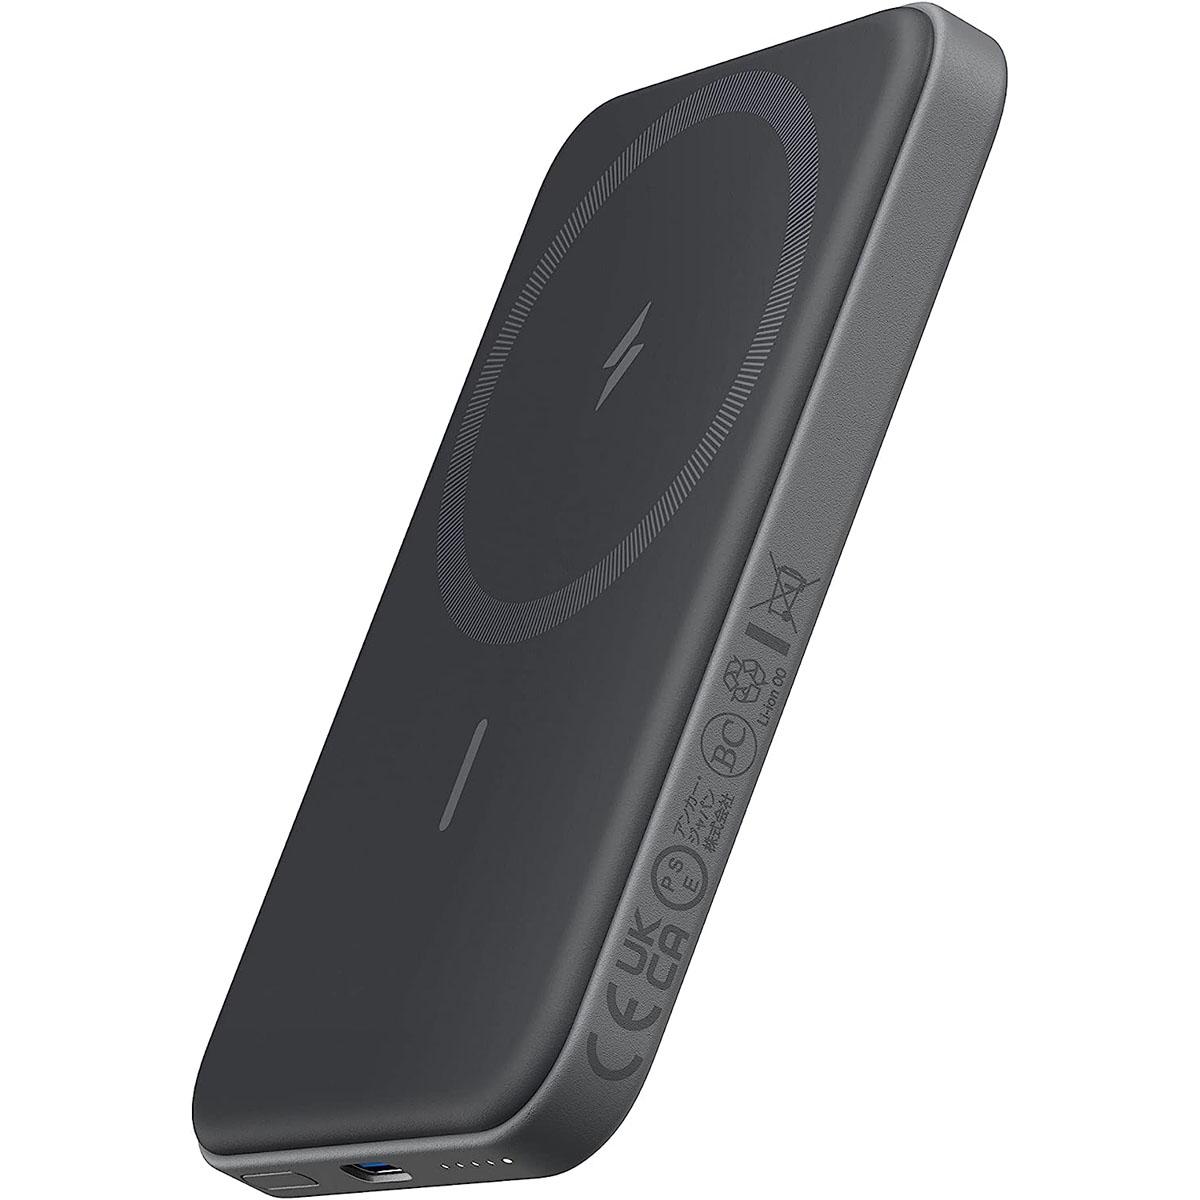 iPhone Anker 621 5000mAh Magnetic Wireless Portable Charger for $29.99 Shipped